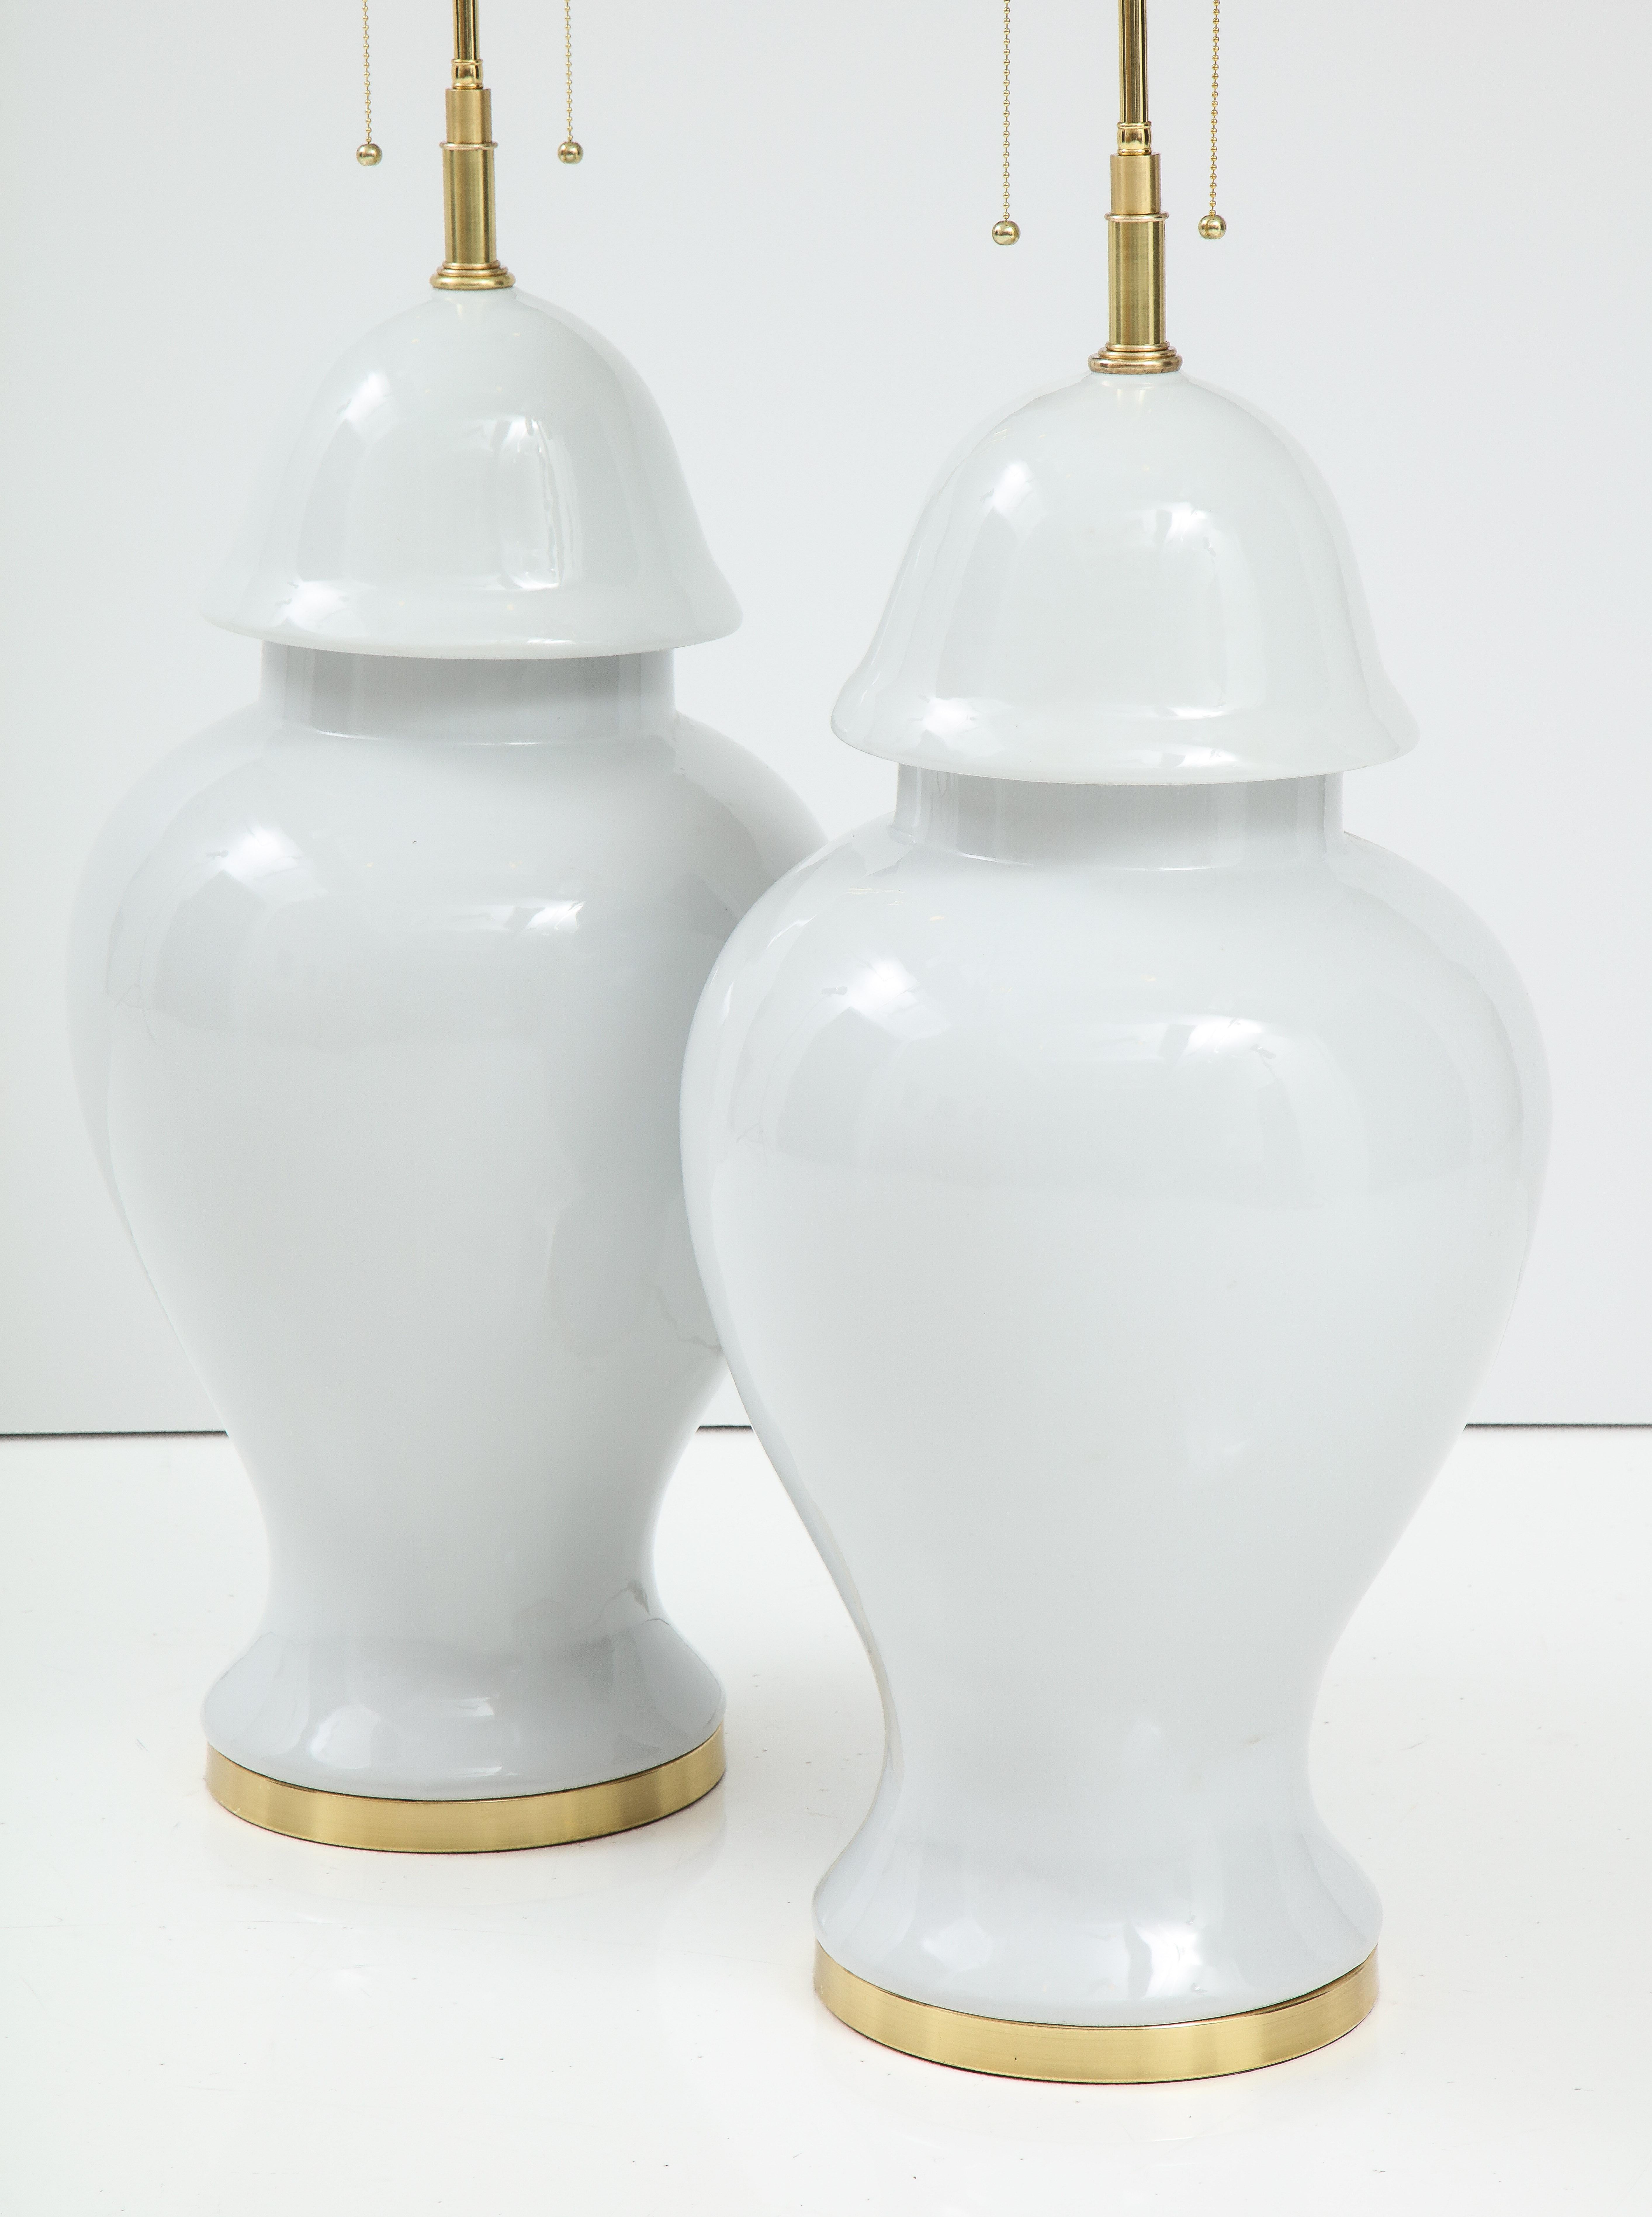 Pair of Monumental Blanc de Chine Lamps In Good Condition For Sale In New York, NY